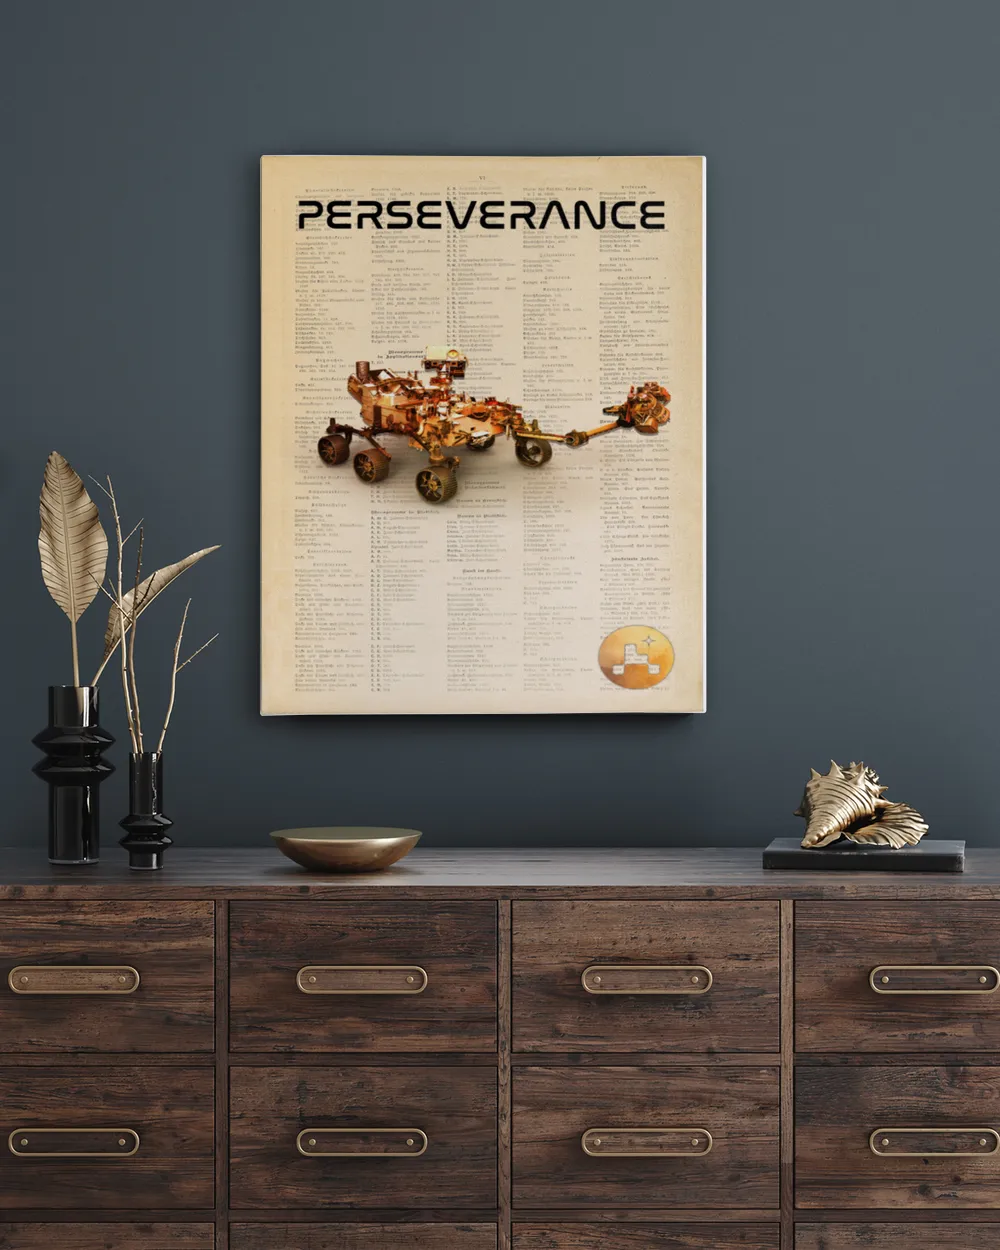 Perseverance Rover Mars Rover Vintage Poster,robots And Space Exploration Poster, Space Wall Art